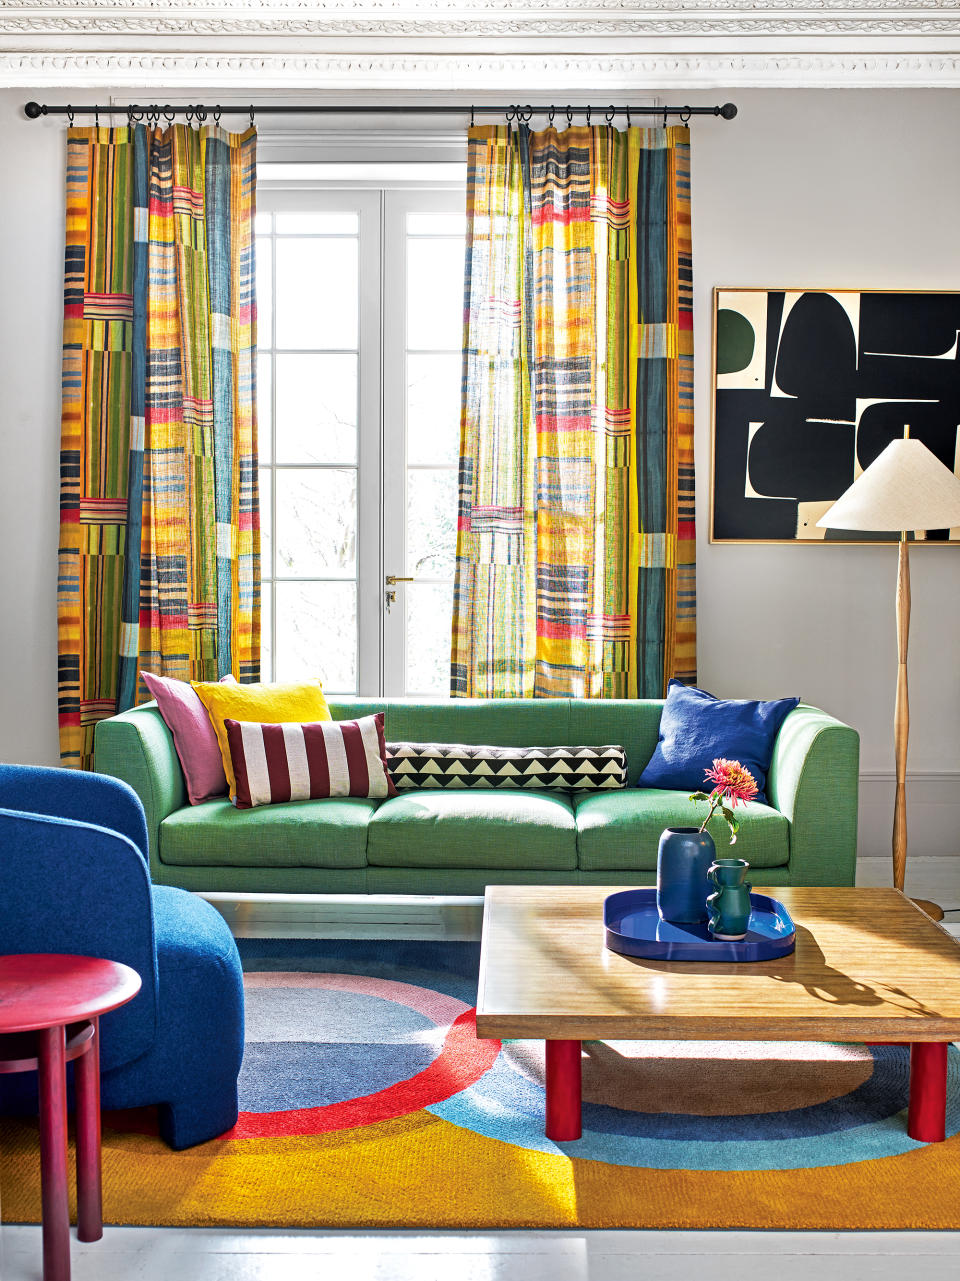 <p> For those confident with color, choosing a bold fabric can make a real statement as a drape. </p> <p> A riot of color reminiscent of Joseph&apos;s technicolor dream coat, Pierre Frey&apos;s Festival multicolore fabric perfectly brings together all the vibrant tones in this artistic scheme while the patchwork feel helps soften the bold shapes throughout the room.&#xA0; </p>